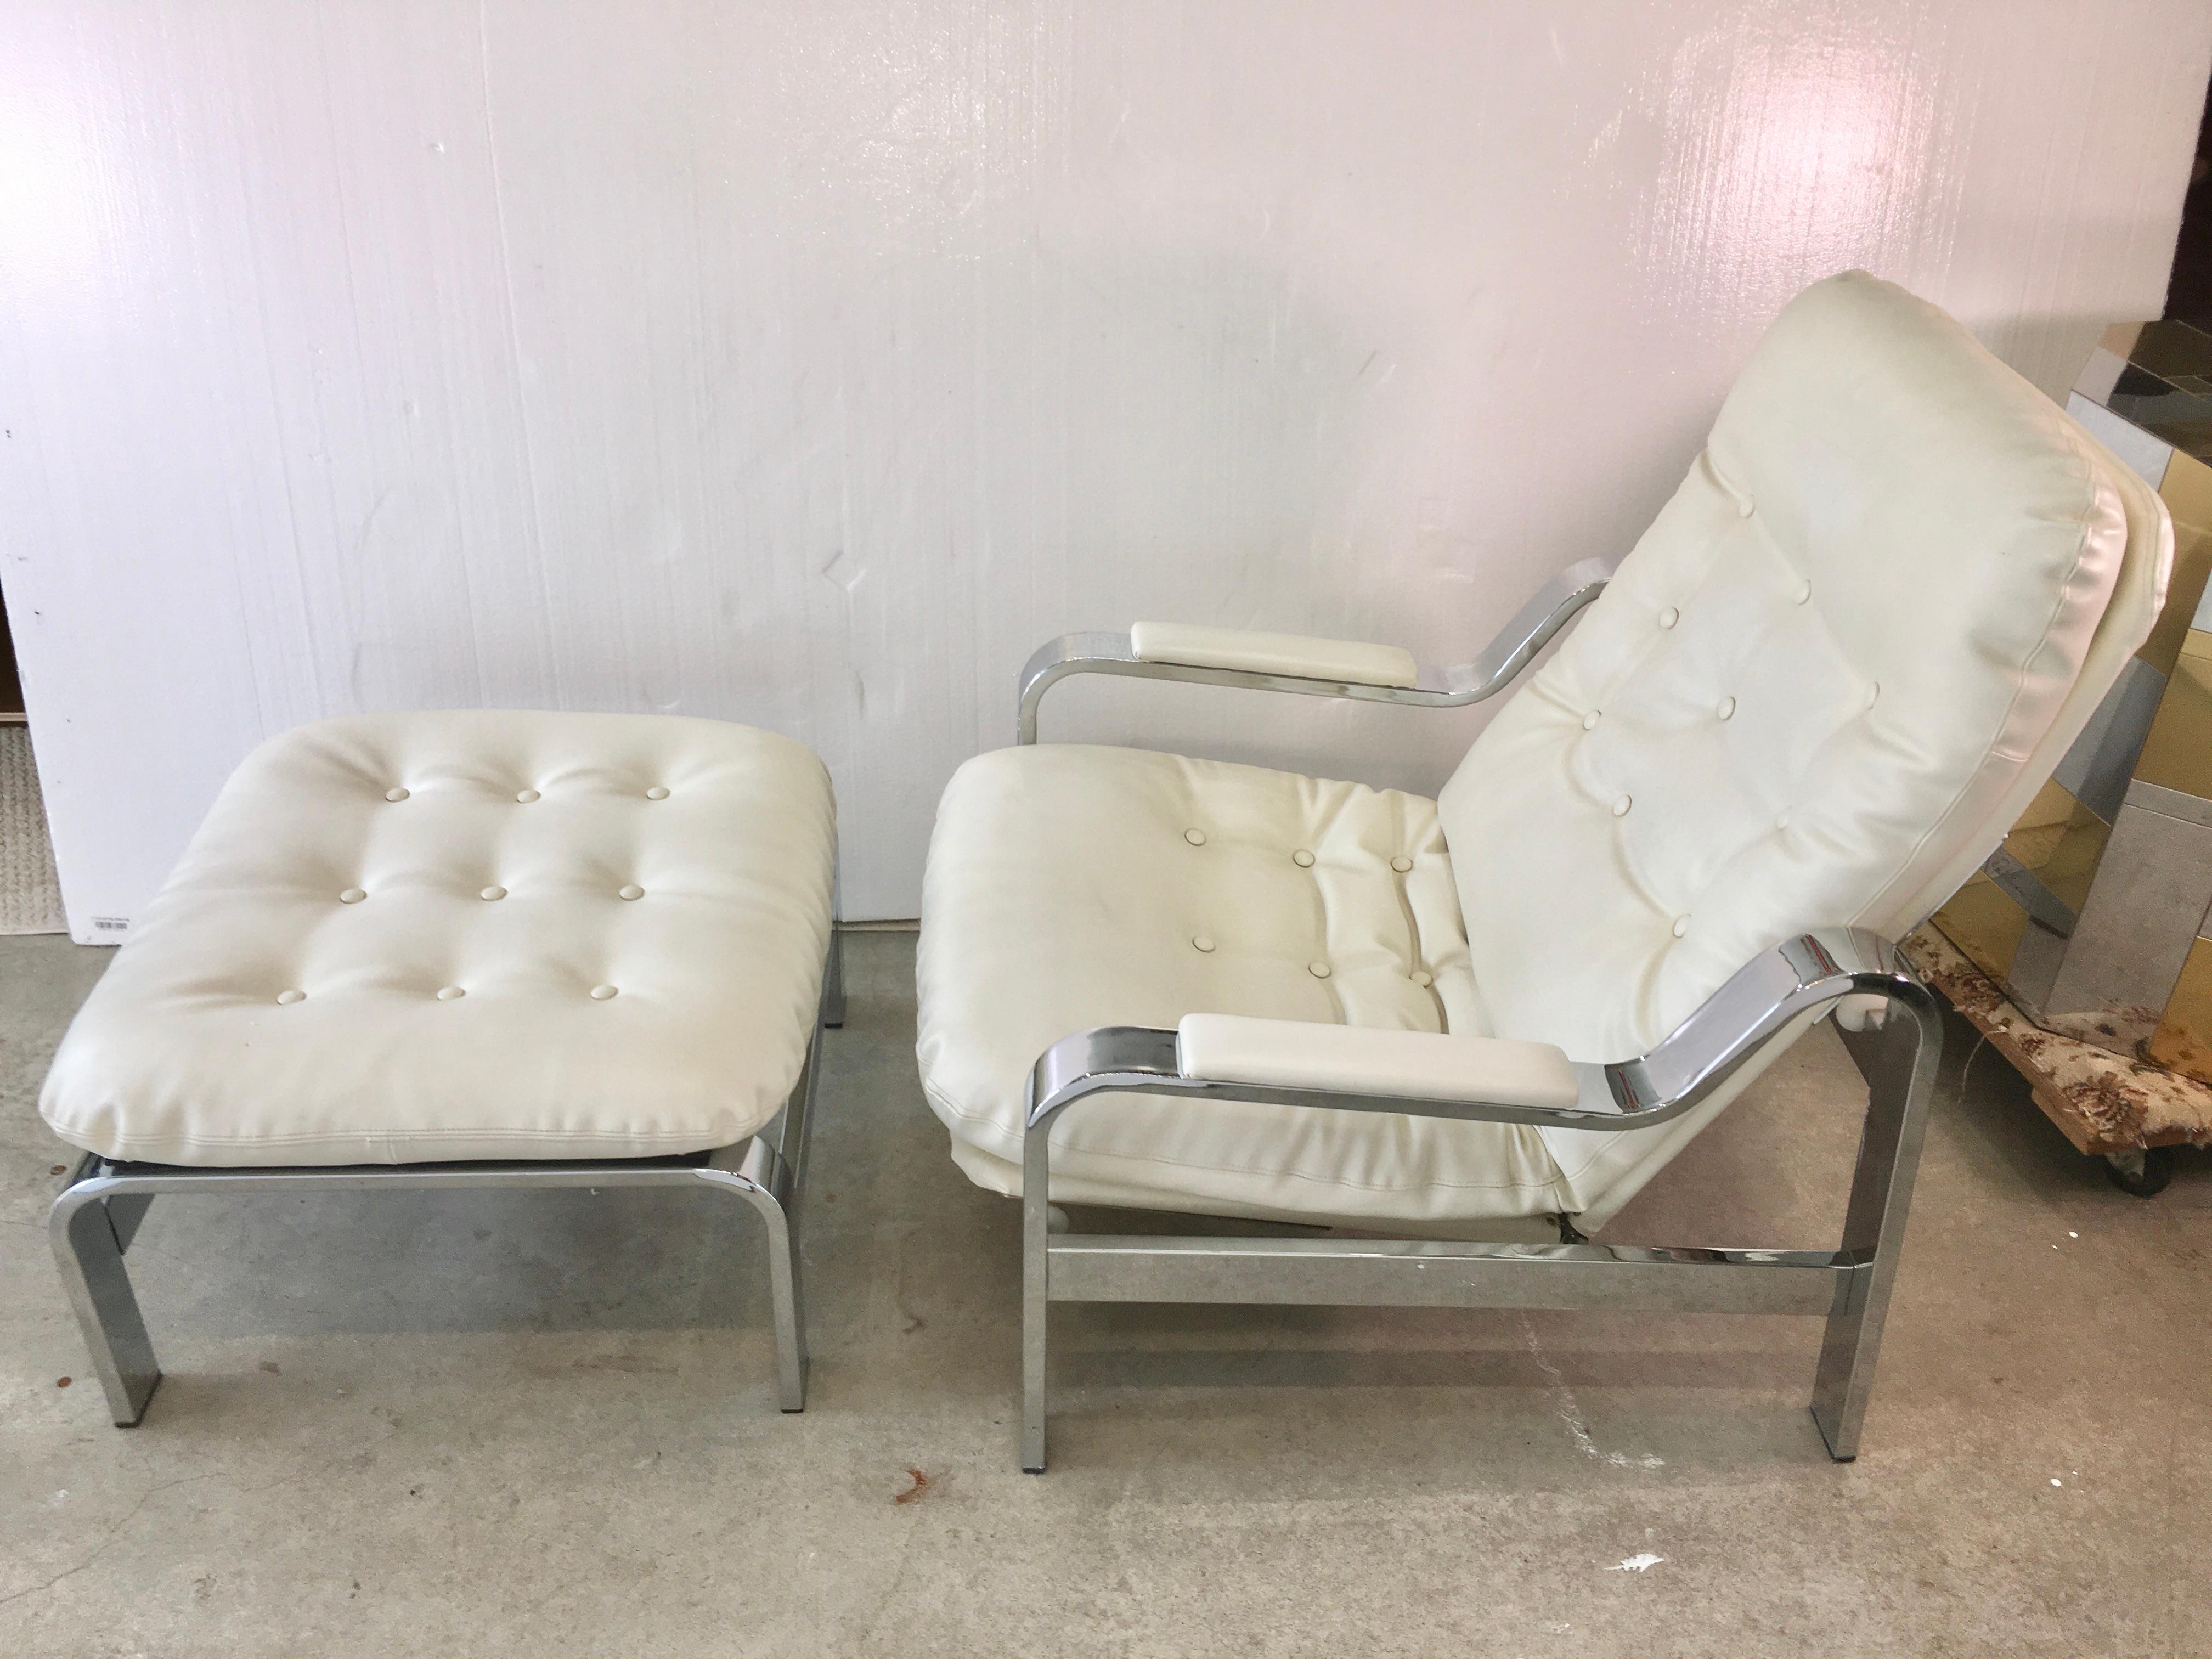 Stylish chrome frame reclining armchair and ottoman imported from Italy by Selig Manufacturing Co. Inc., mid-1970s.
Upholstered cushions in saddle stitched button-tufted near white Italian leather.
Very clean. Chrome is bright and shiny. All